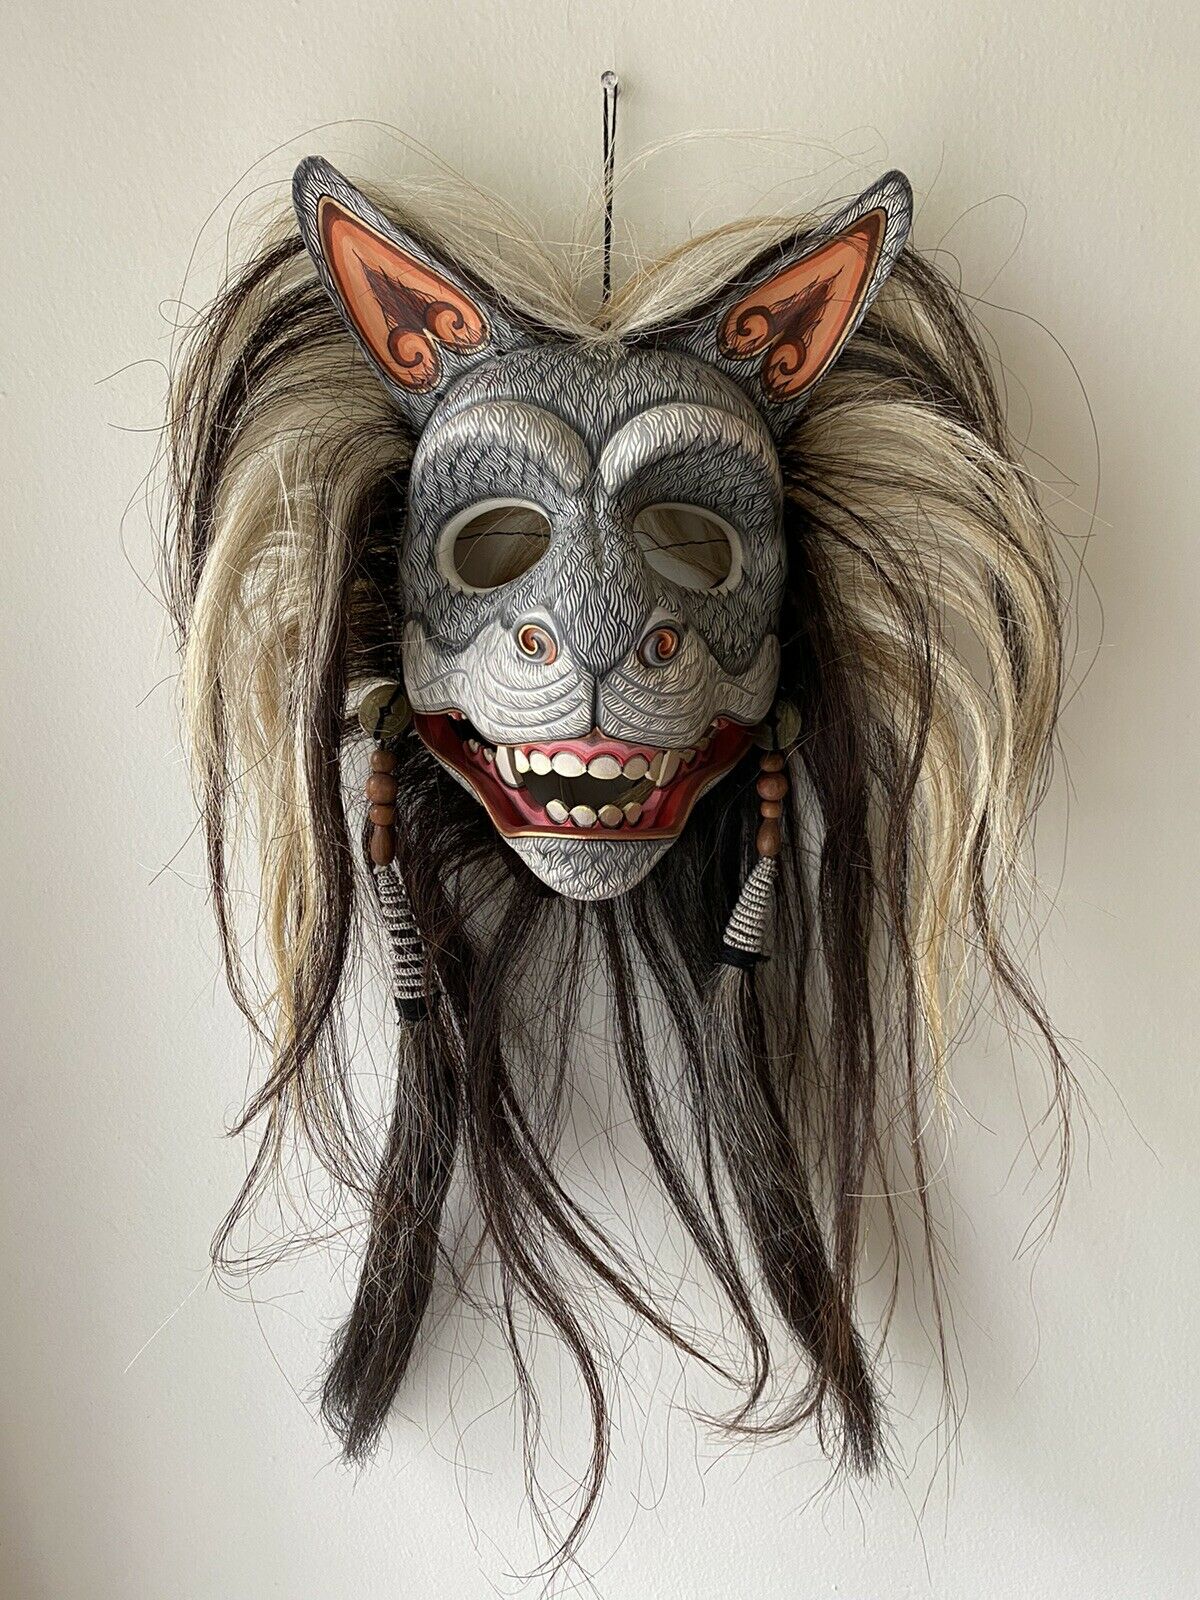 Hand Carved And Painted Wolf Mask By I.b. Sutarja, From Ubud, Bali, Indonesia